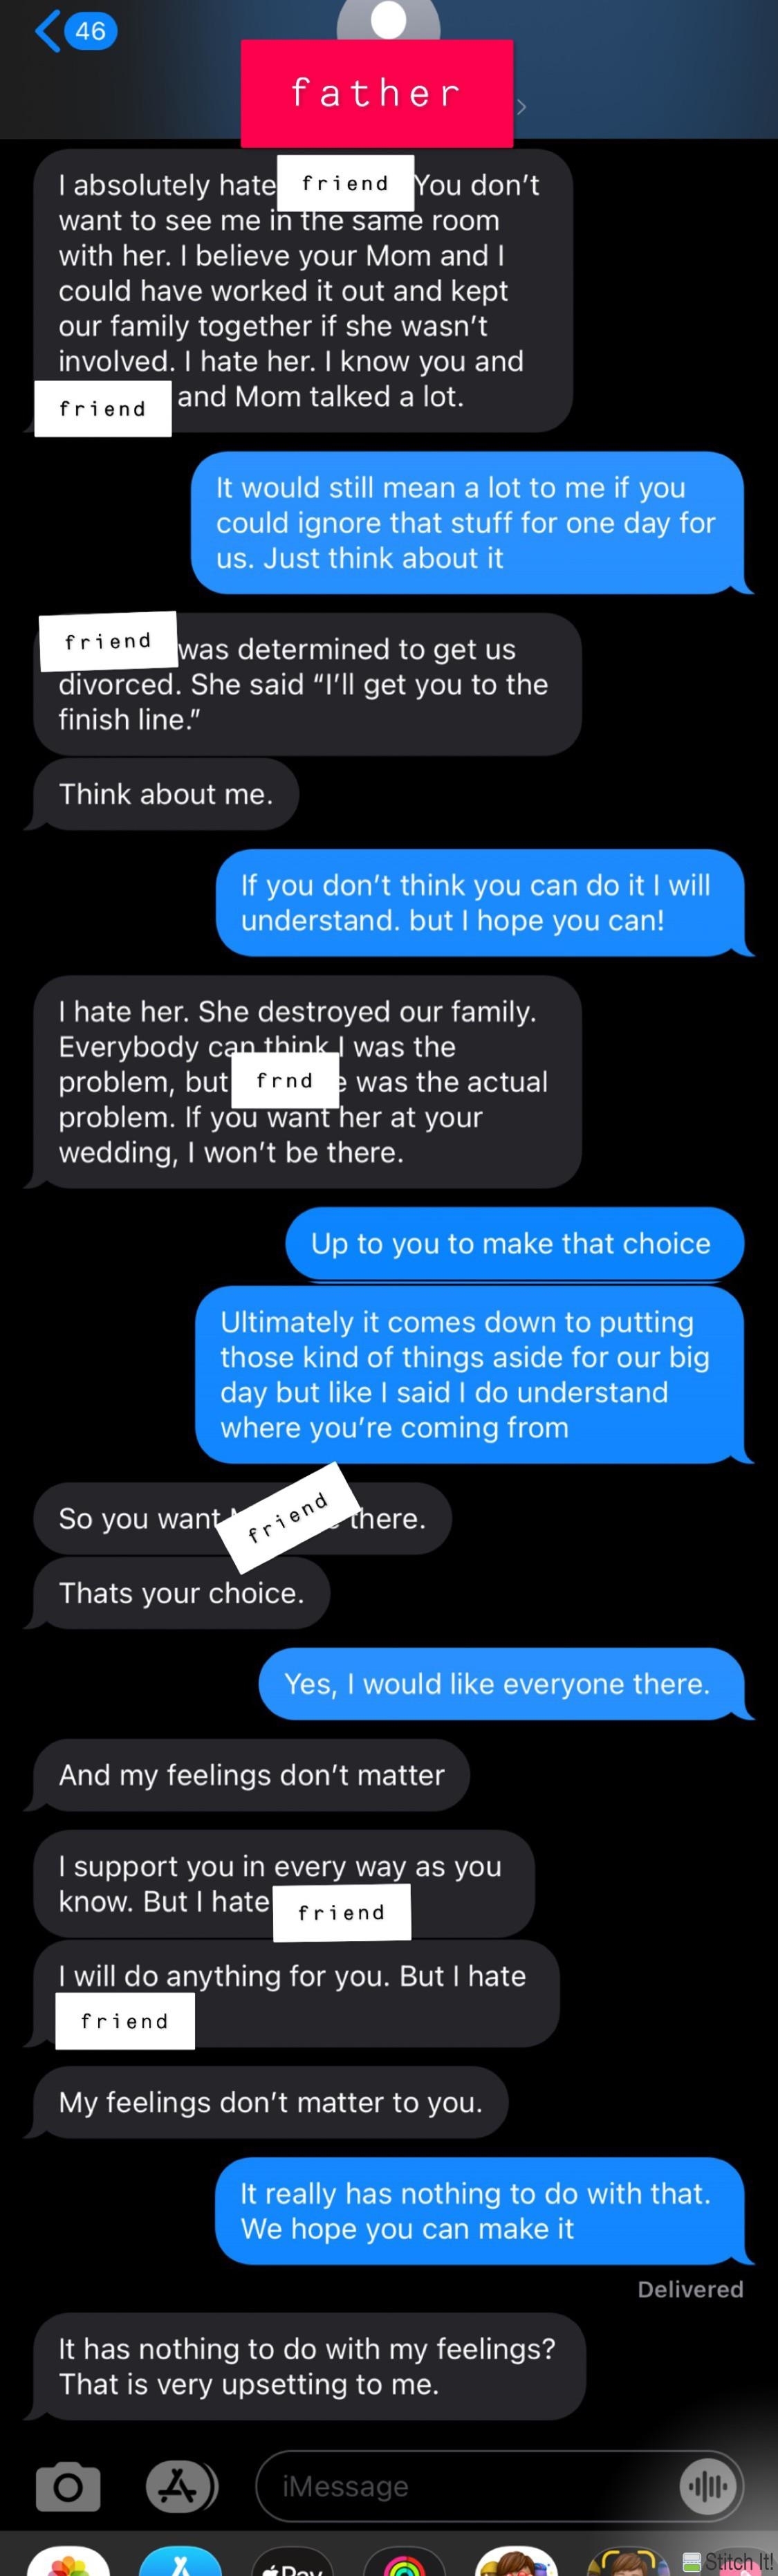 The father of the bride says multiple times that he hates the bride&#x27;s friend and blames her for his divorce; when the bride says the friend will be attending, the father says his feelings must not matter to her